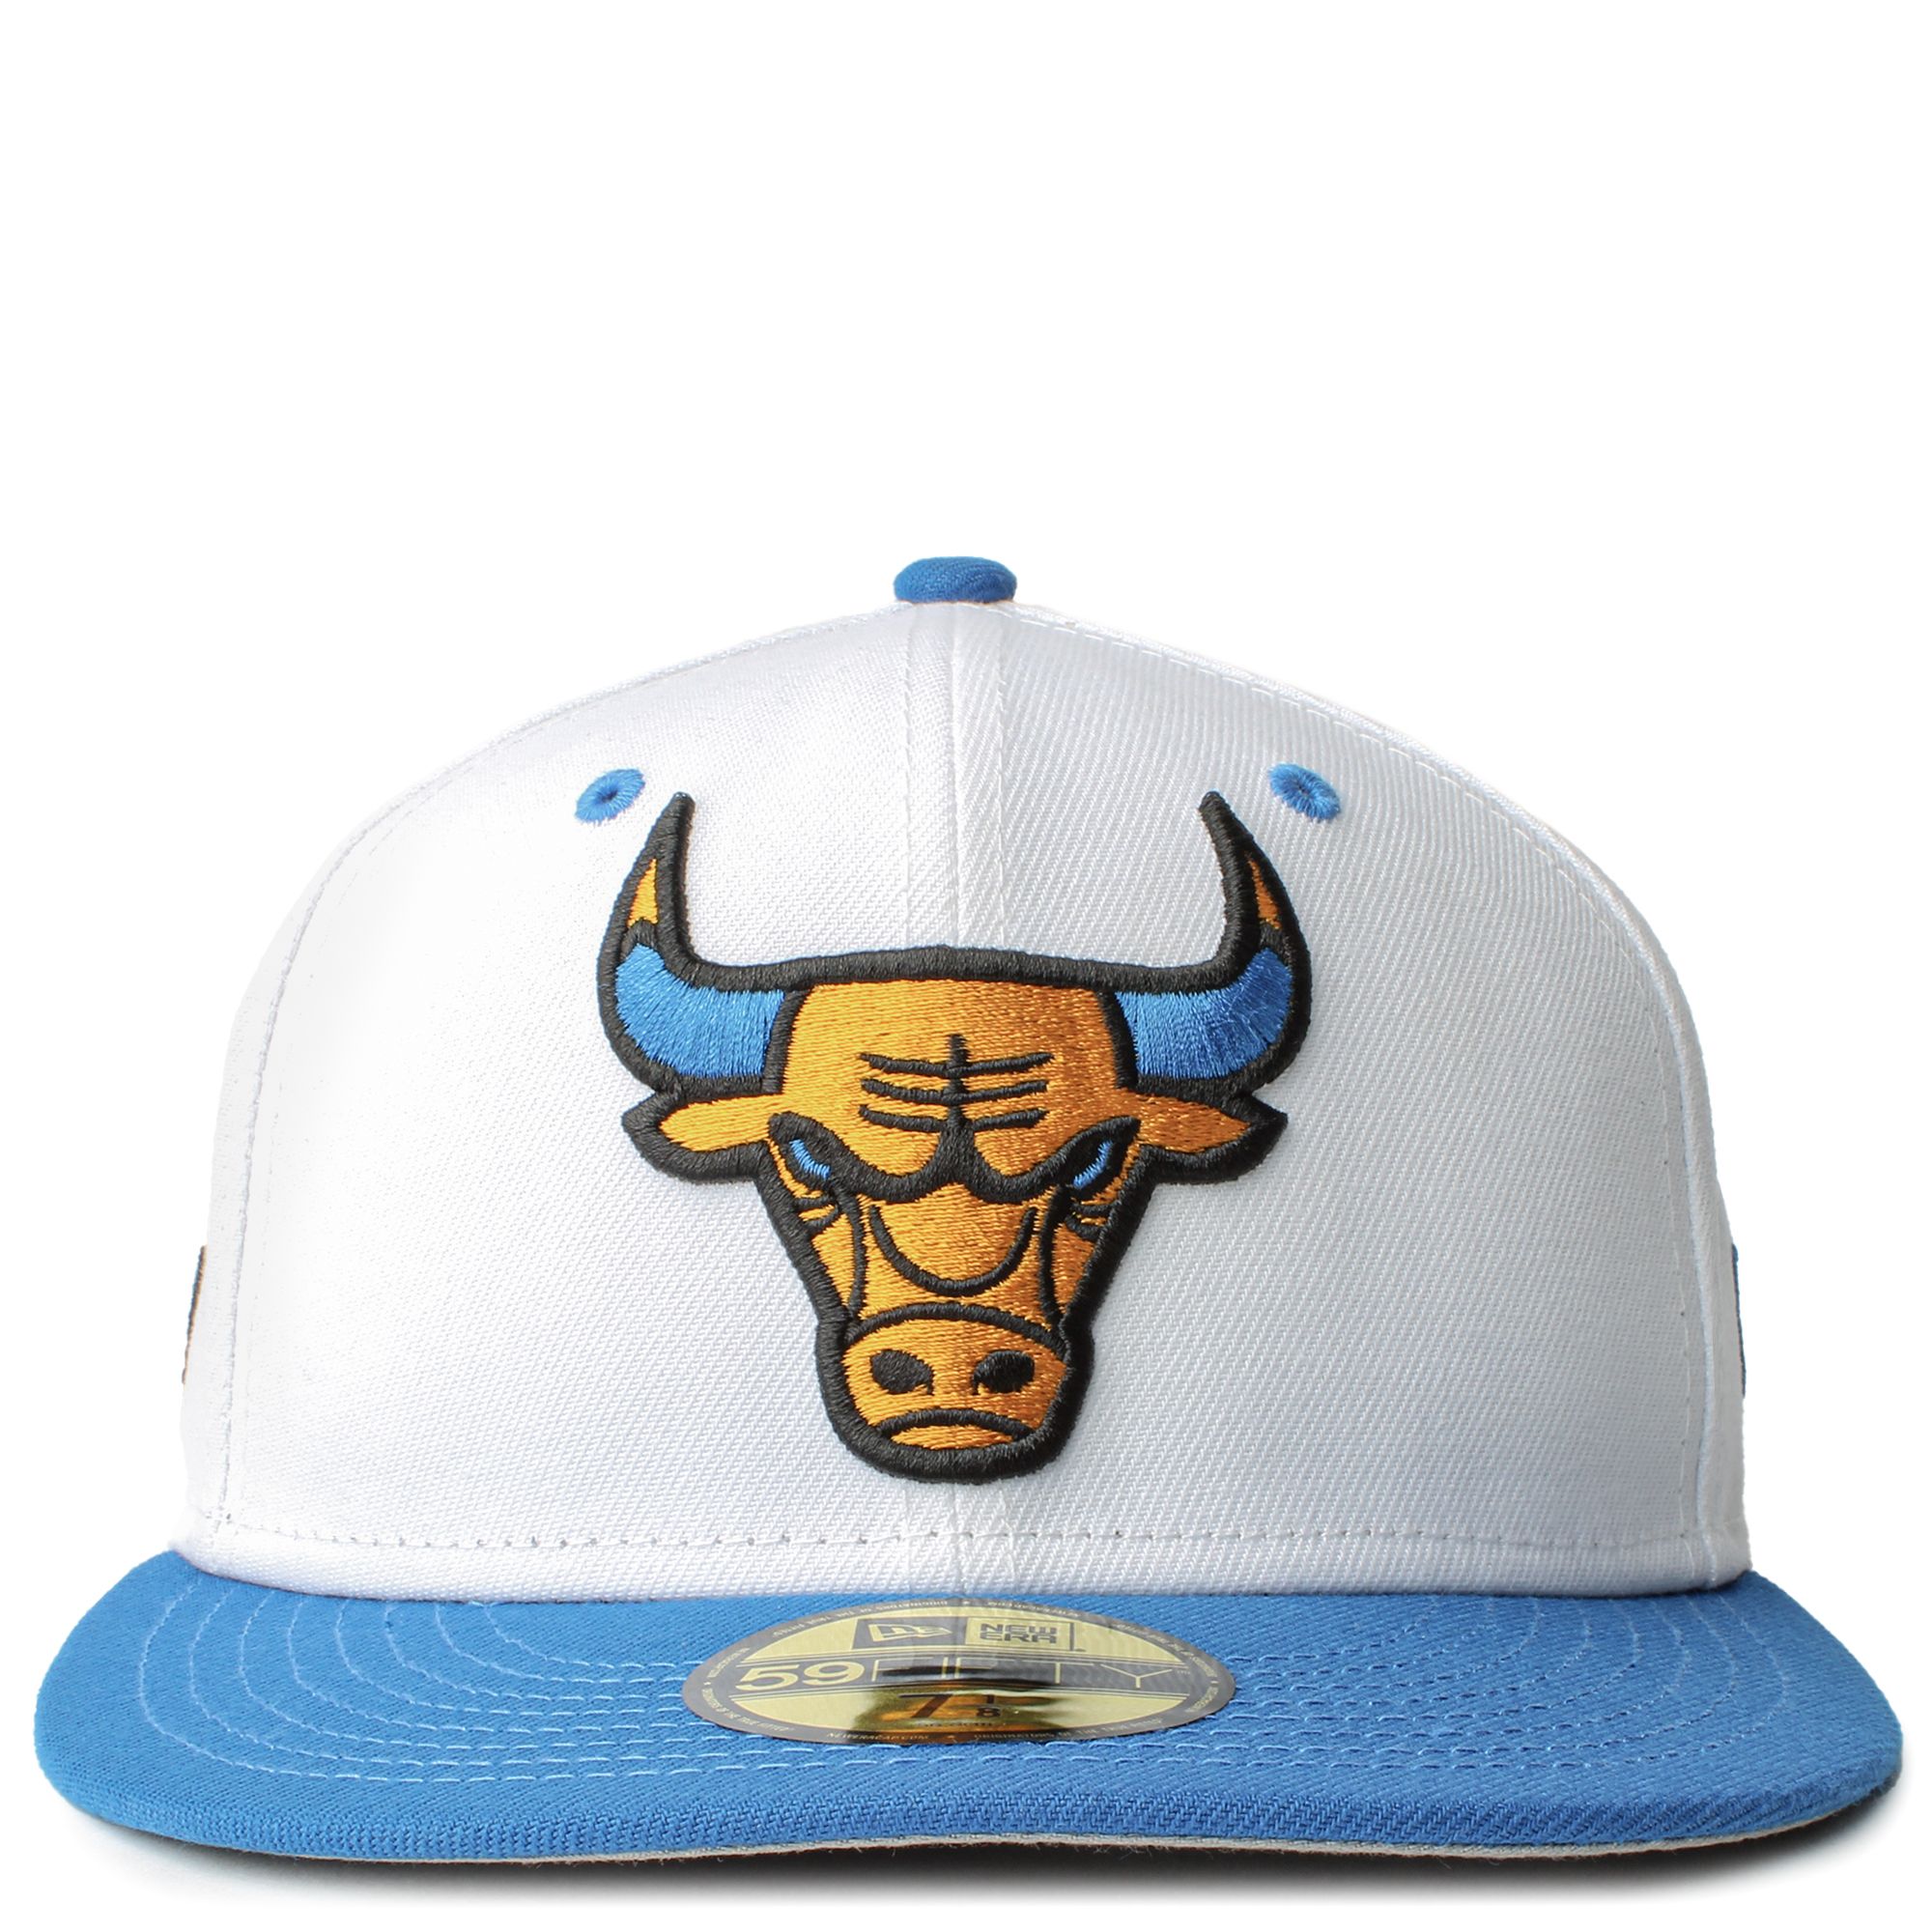 New Era Caps Chicago Bulls 59FIFTY Fitted Hat White/Blue